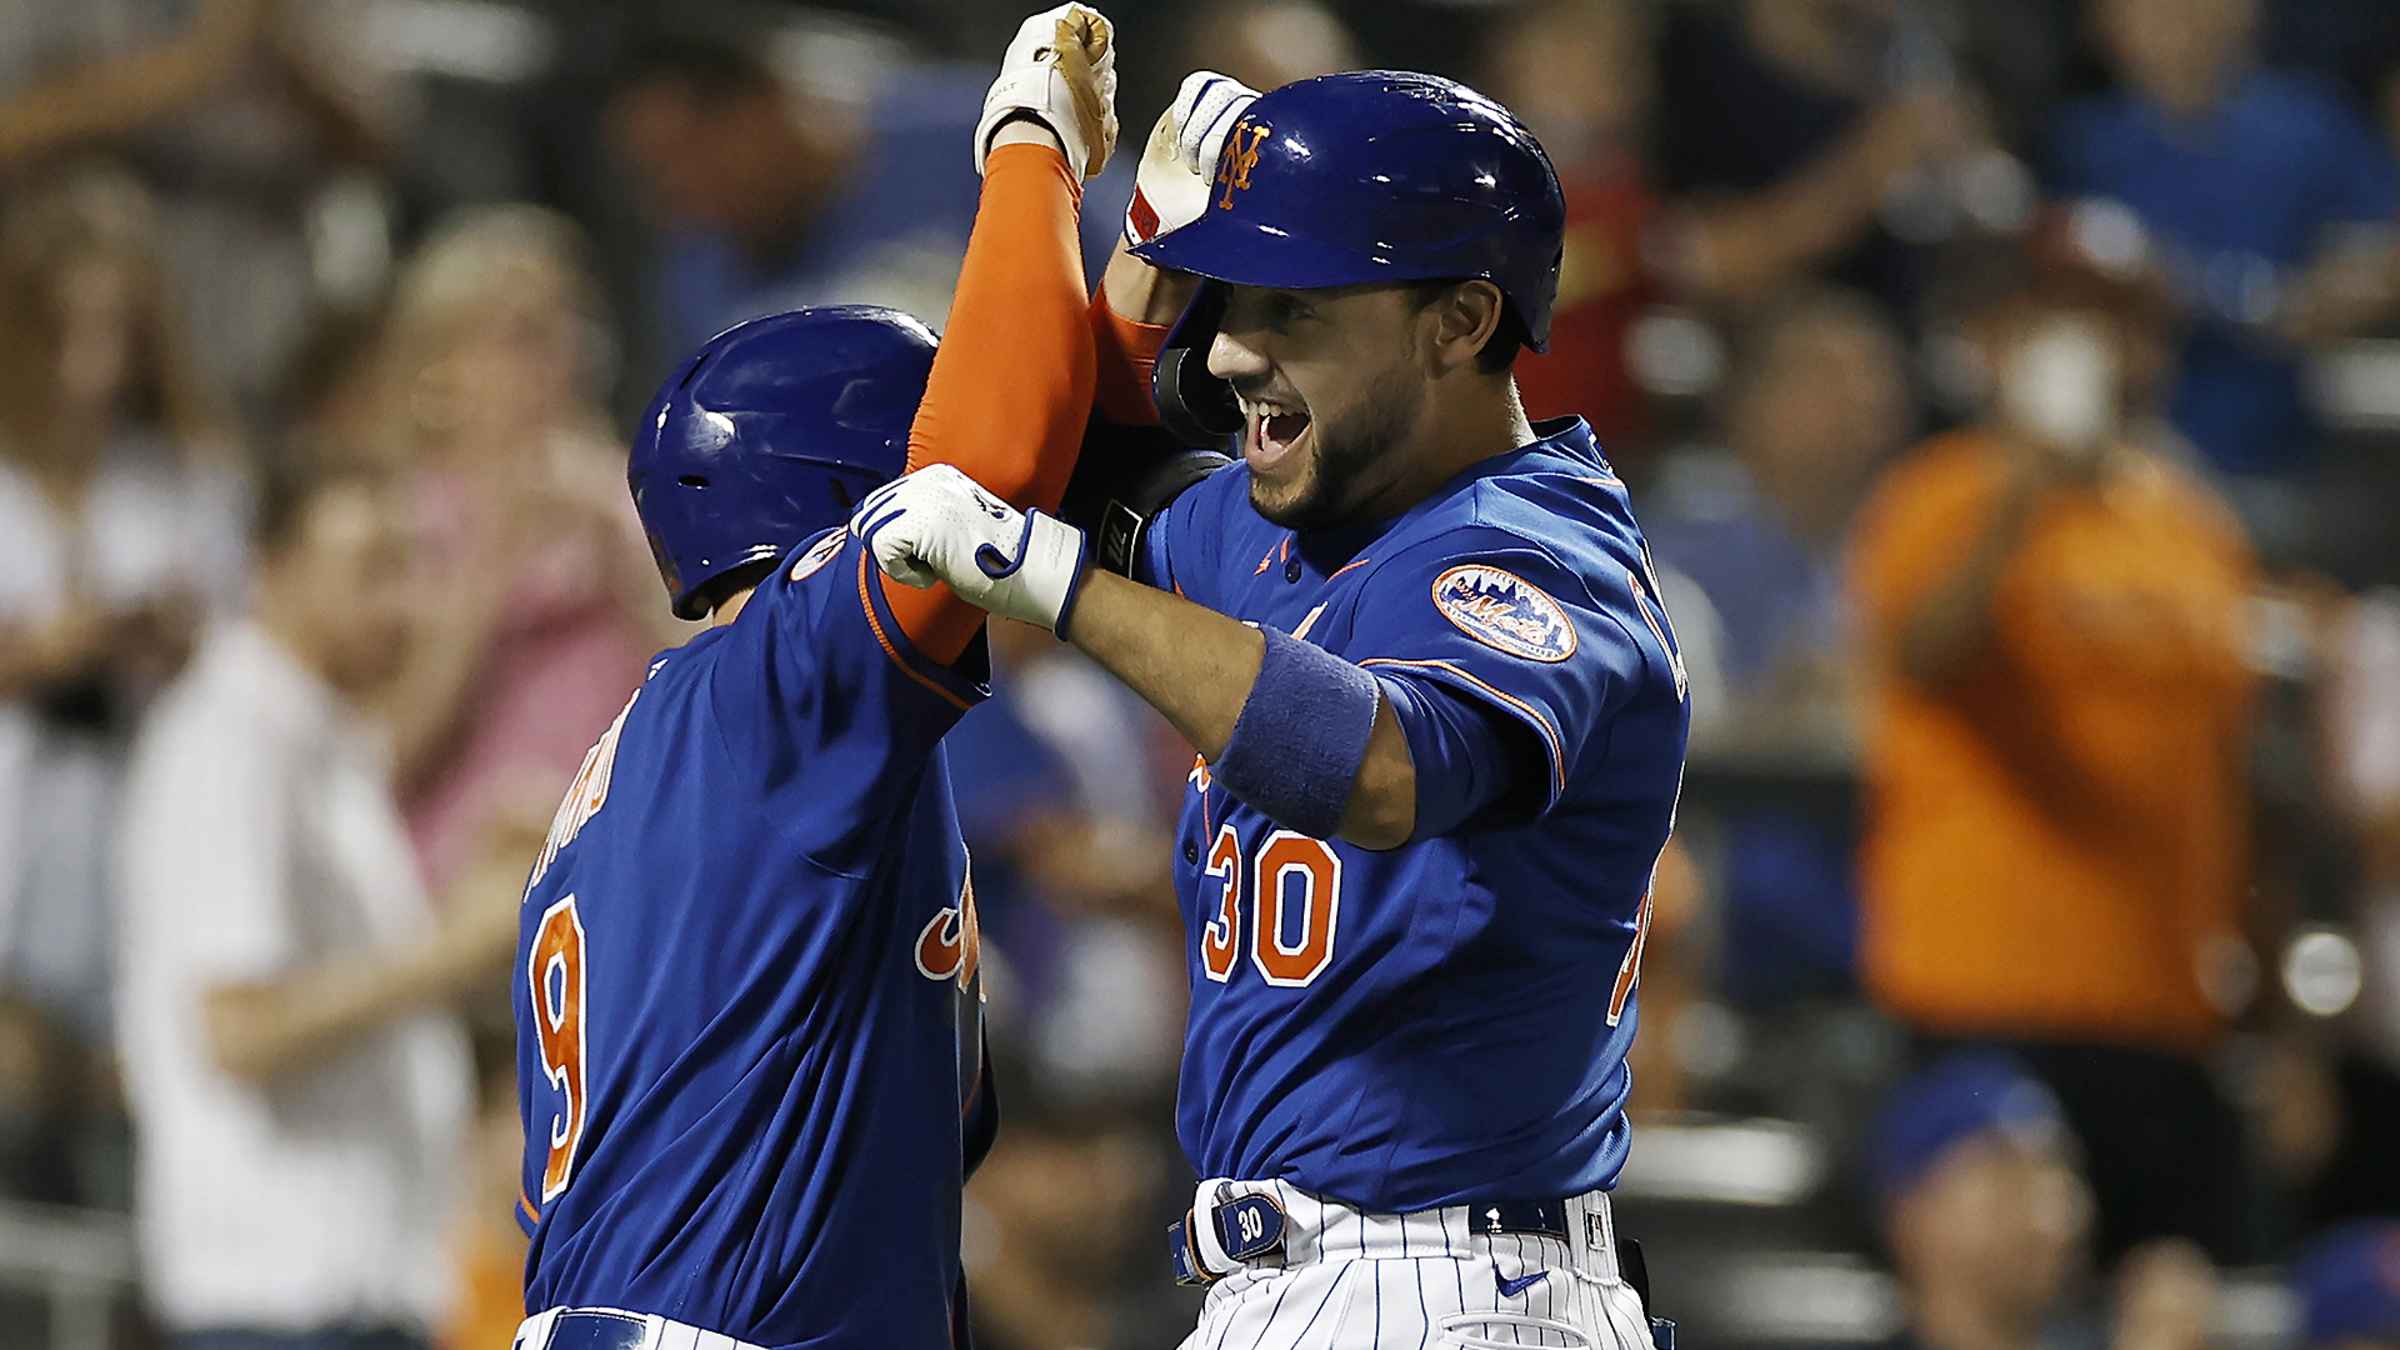 Bay's slam lifts Mets to sweep of Marlins